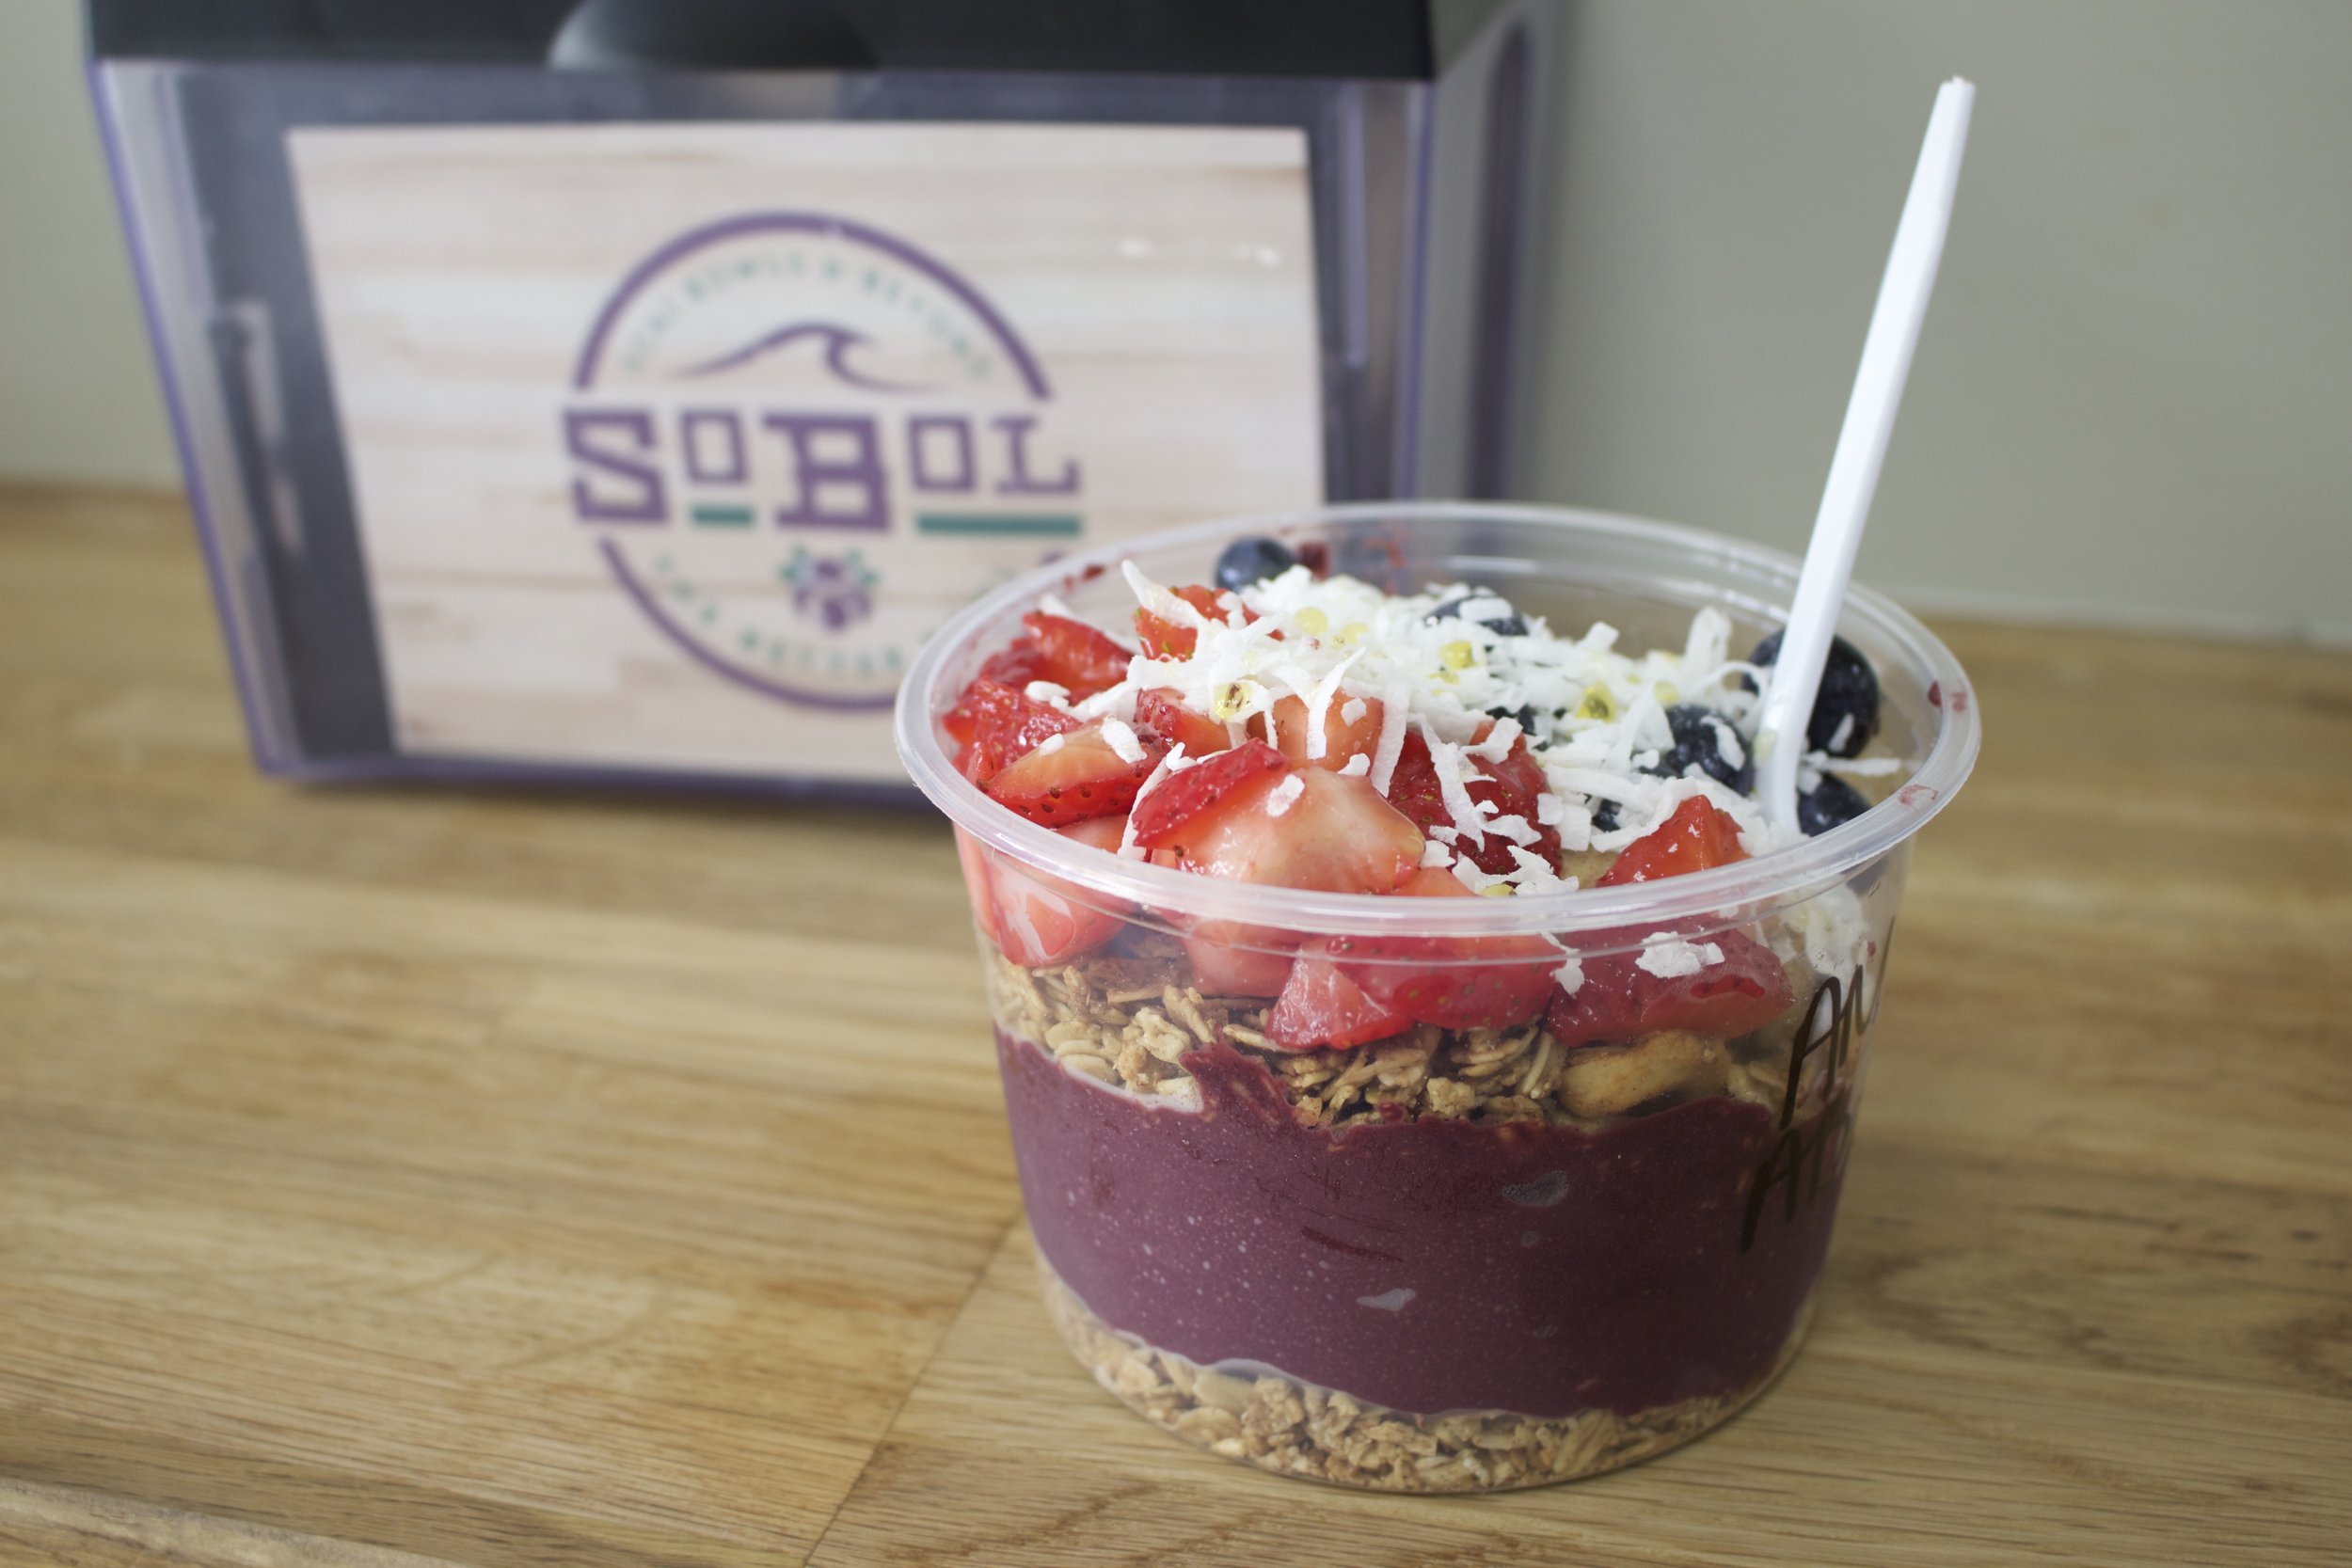   The acai bowls at SoBol in Huntington bring together acai fruit, homemade granola, blueberries, sliced banana, strawberries, coconut and honey for a tasty, healthy treat.   Long Islander News photos/Janee Law  